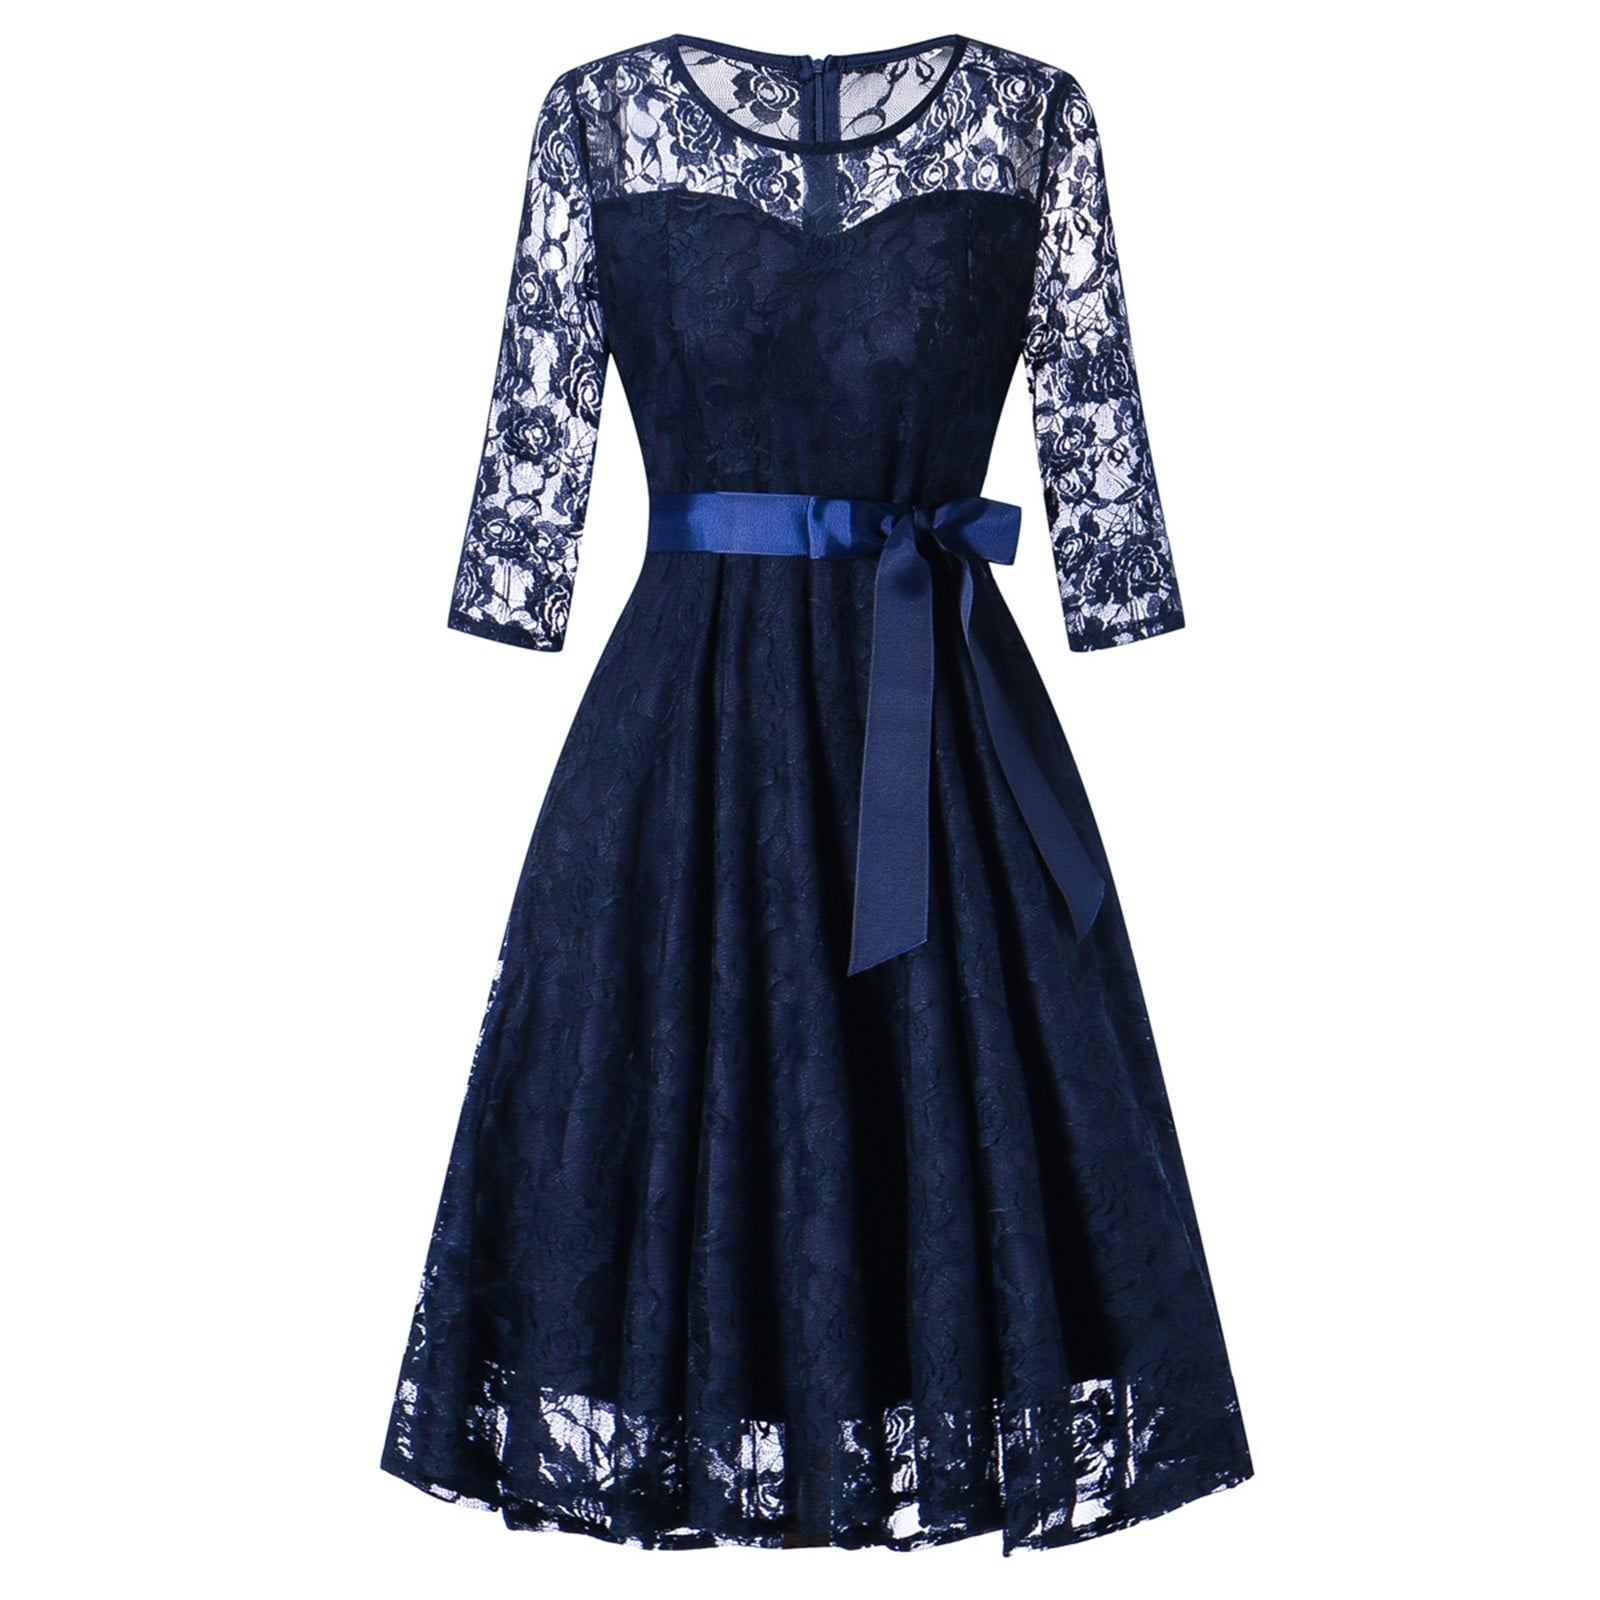 Women's 3/4 Sleeve Lace Dress Vintage Patchwork Solid Big Swing